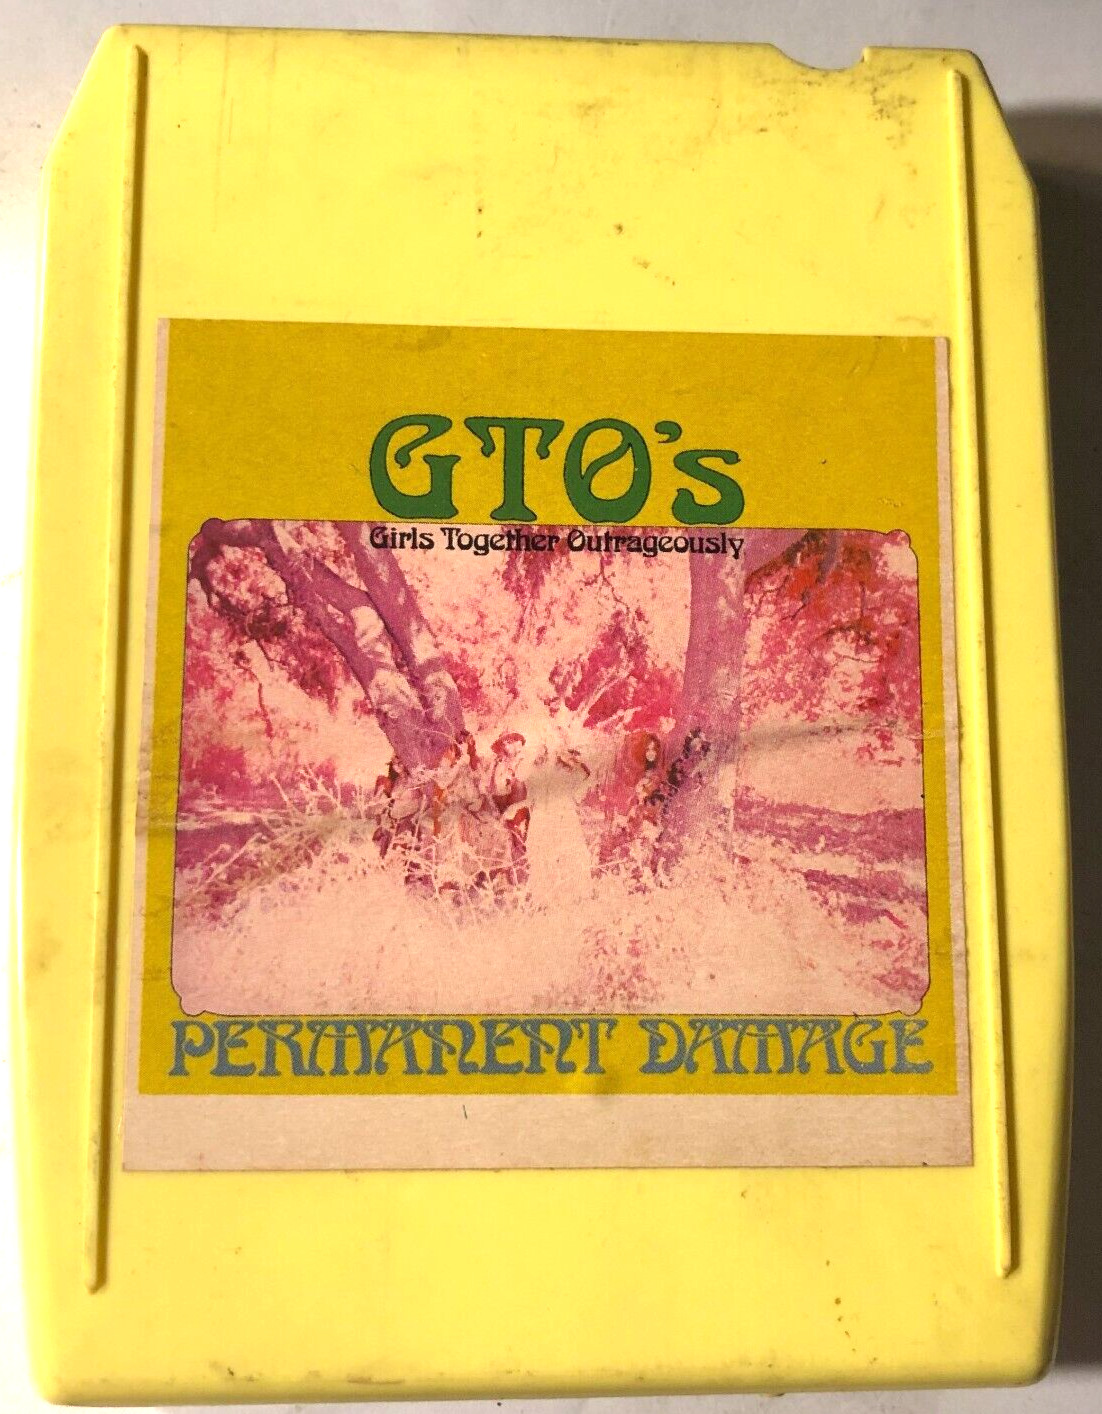 GTOs Girls Together Outrageously Permanent Damage  8 Track  8rm-6390 Miss Pamela